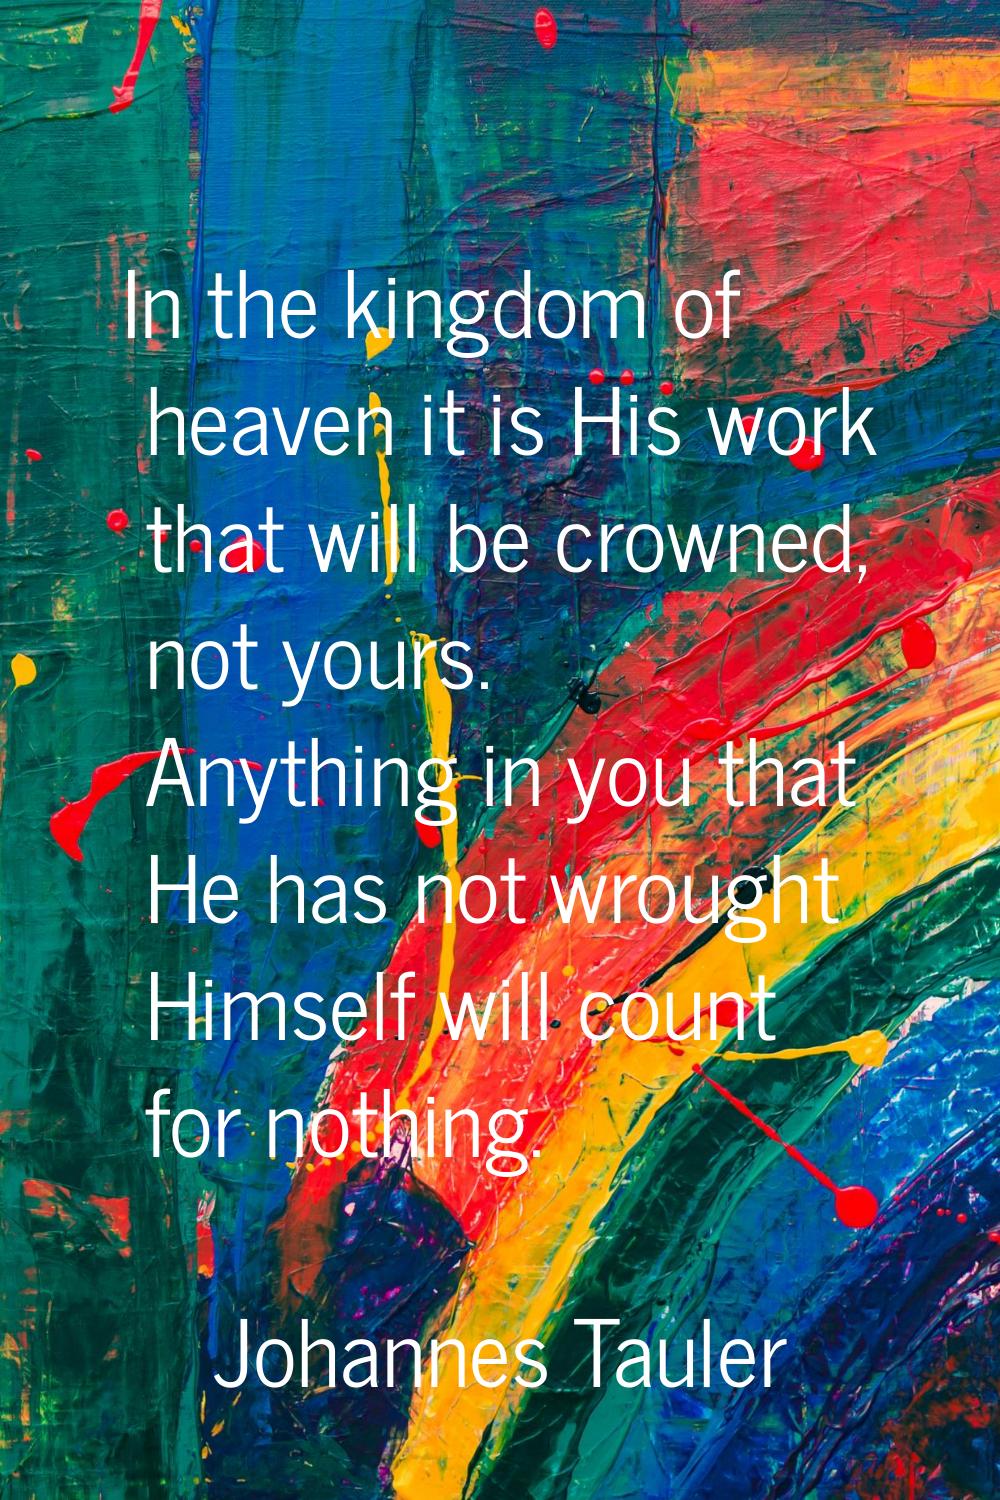 In the kingdom of heaven it is His work that will be crowned, not yours. Anything in you that He ha